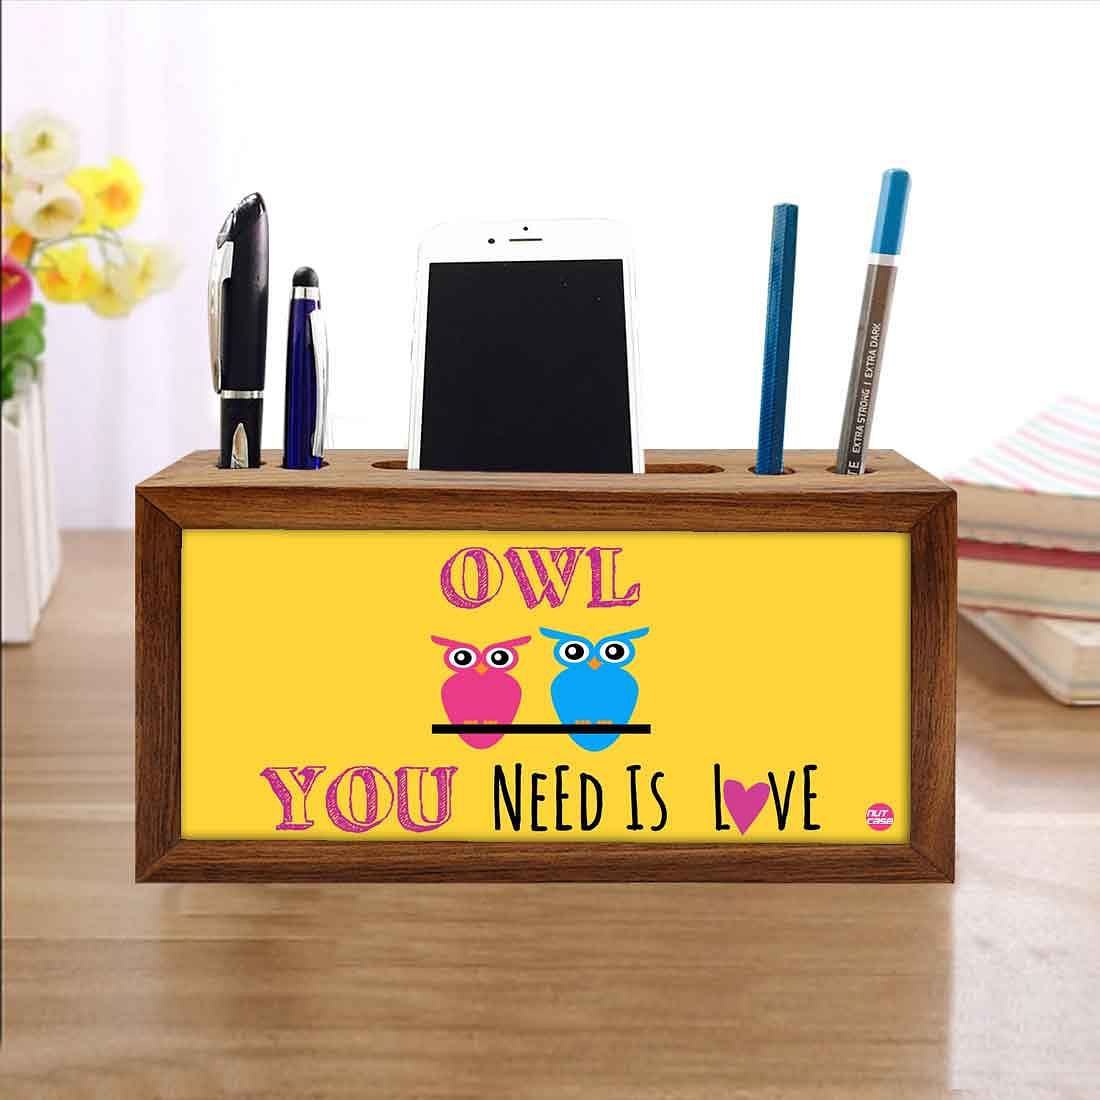 Wooden desk caddy Pen Mobile Stand - Owl You Need Is Love Nutcase